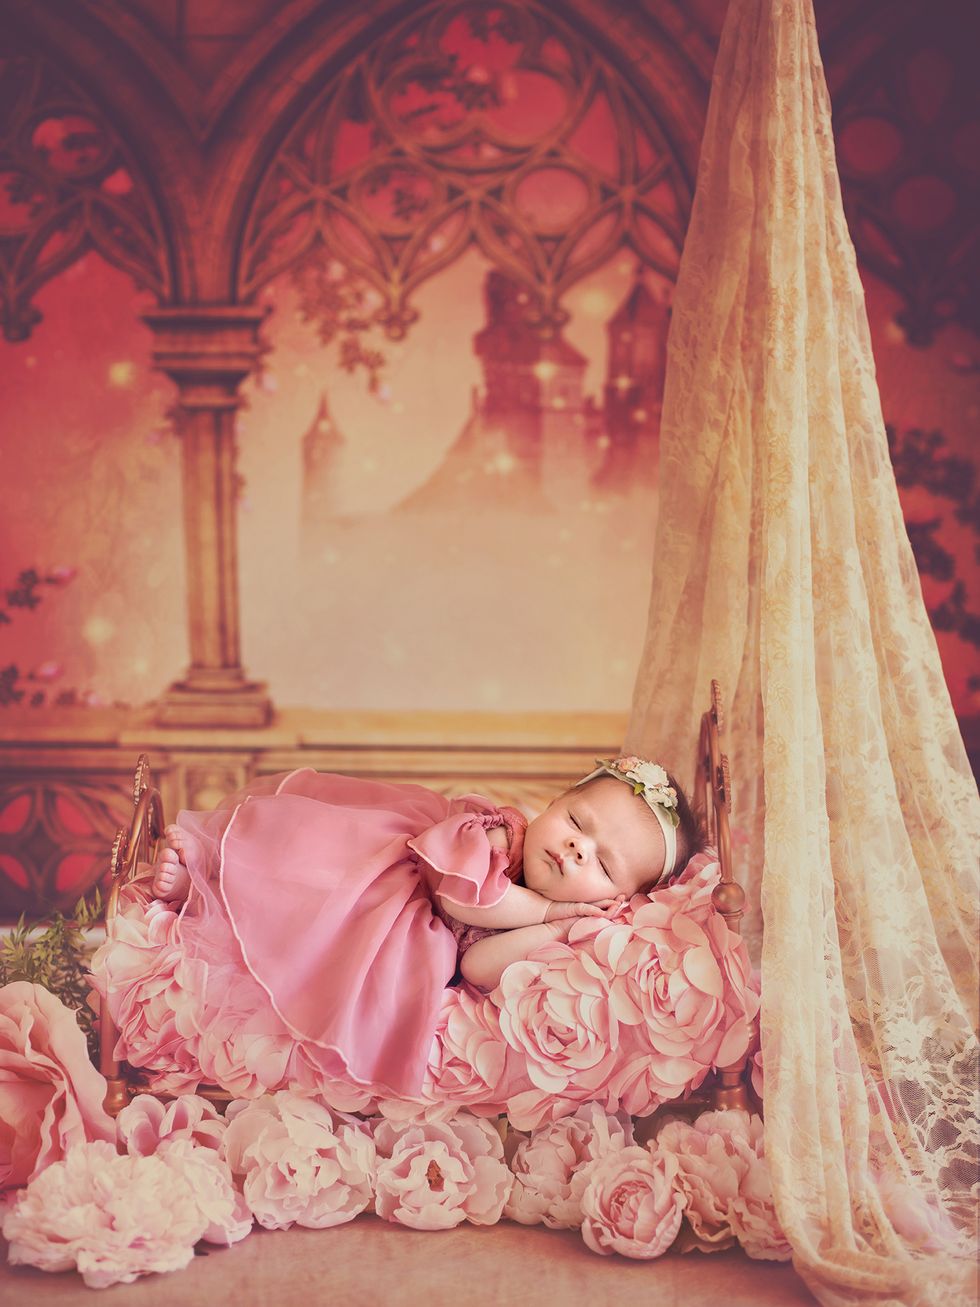 Pink, Beauty, Fashion, Bed, Long hair, Dress, Peach, Room, Blond, Photography, 